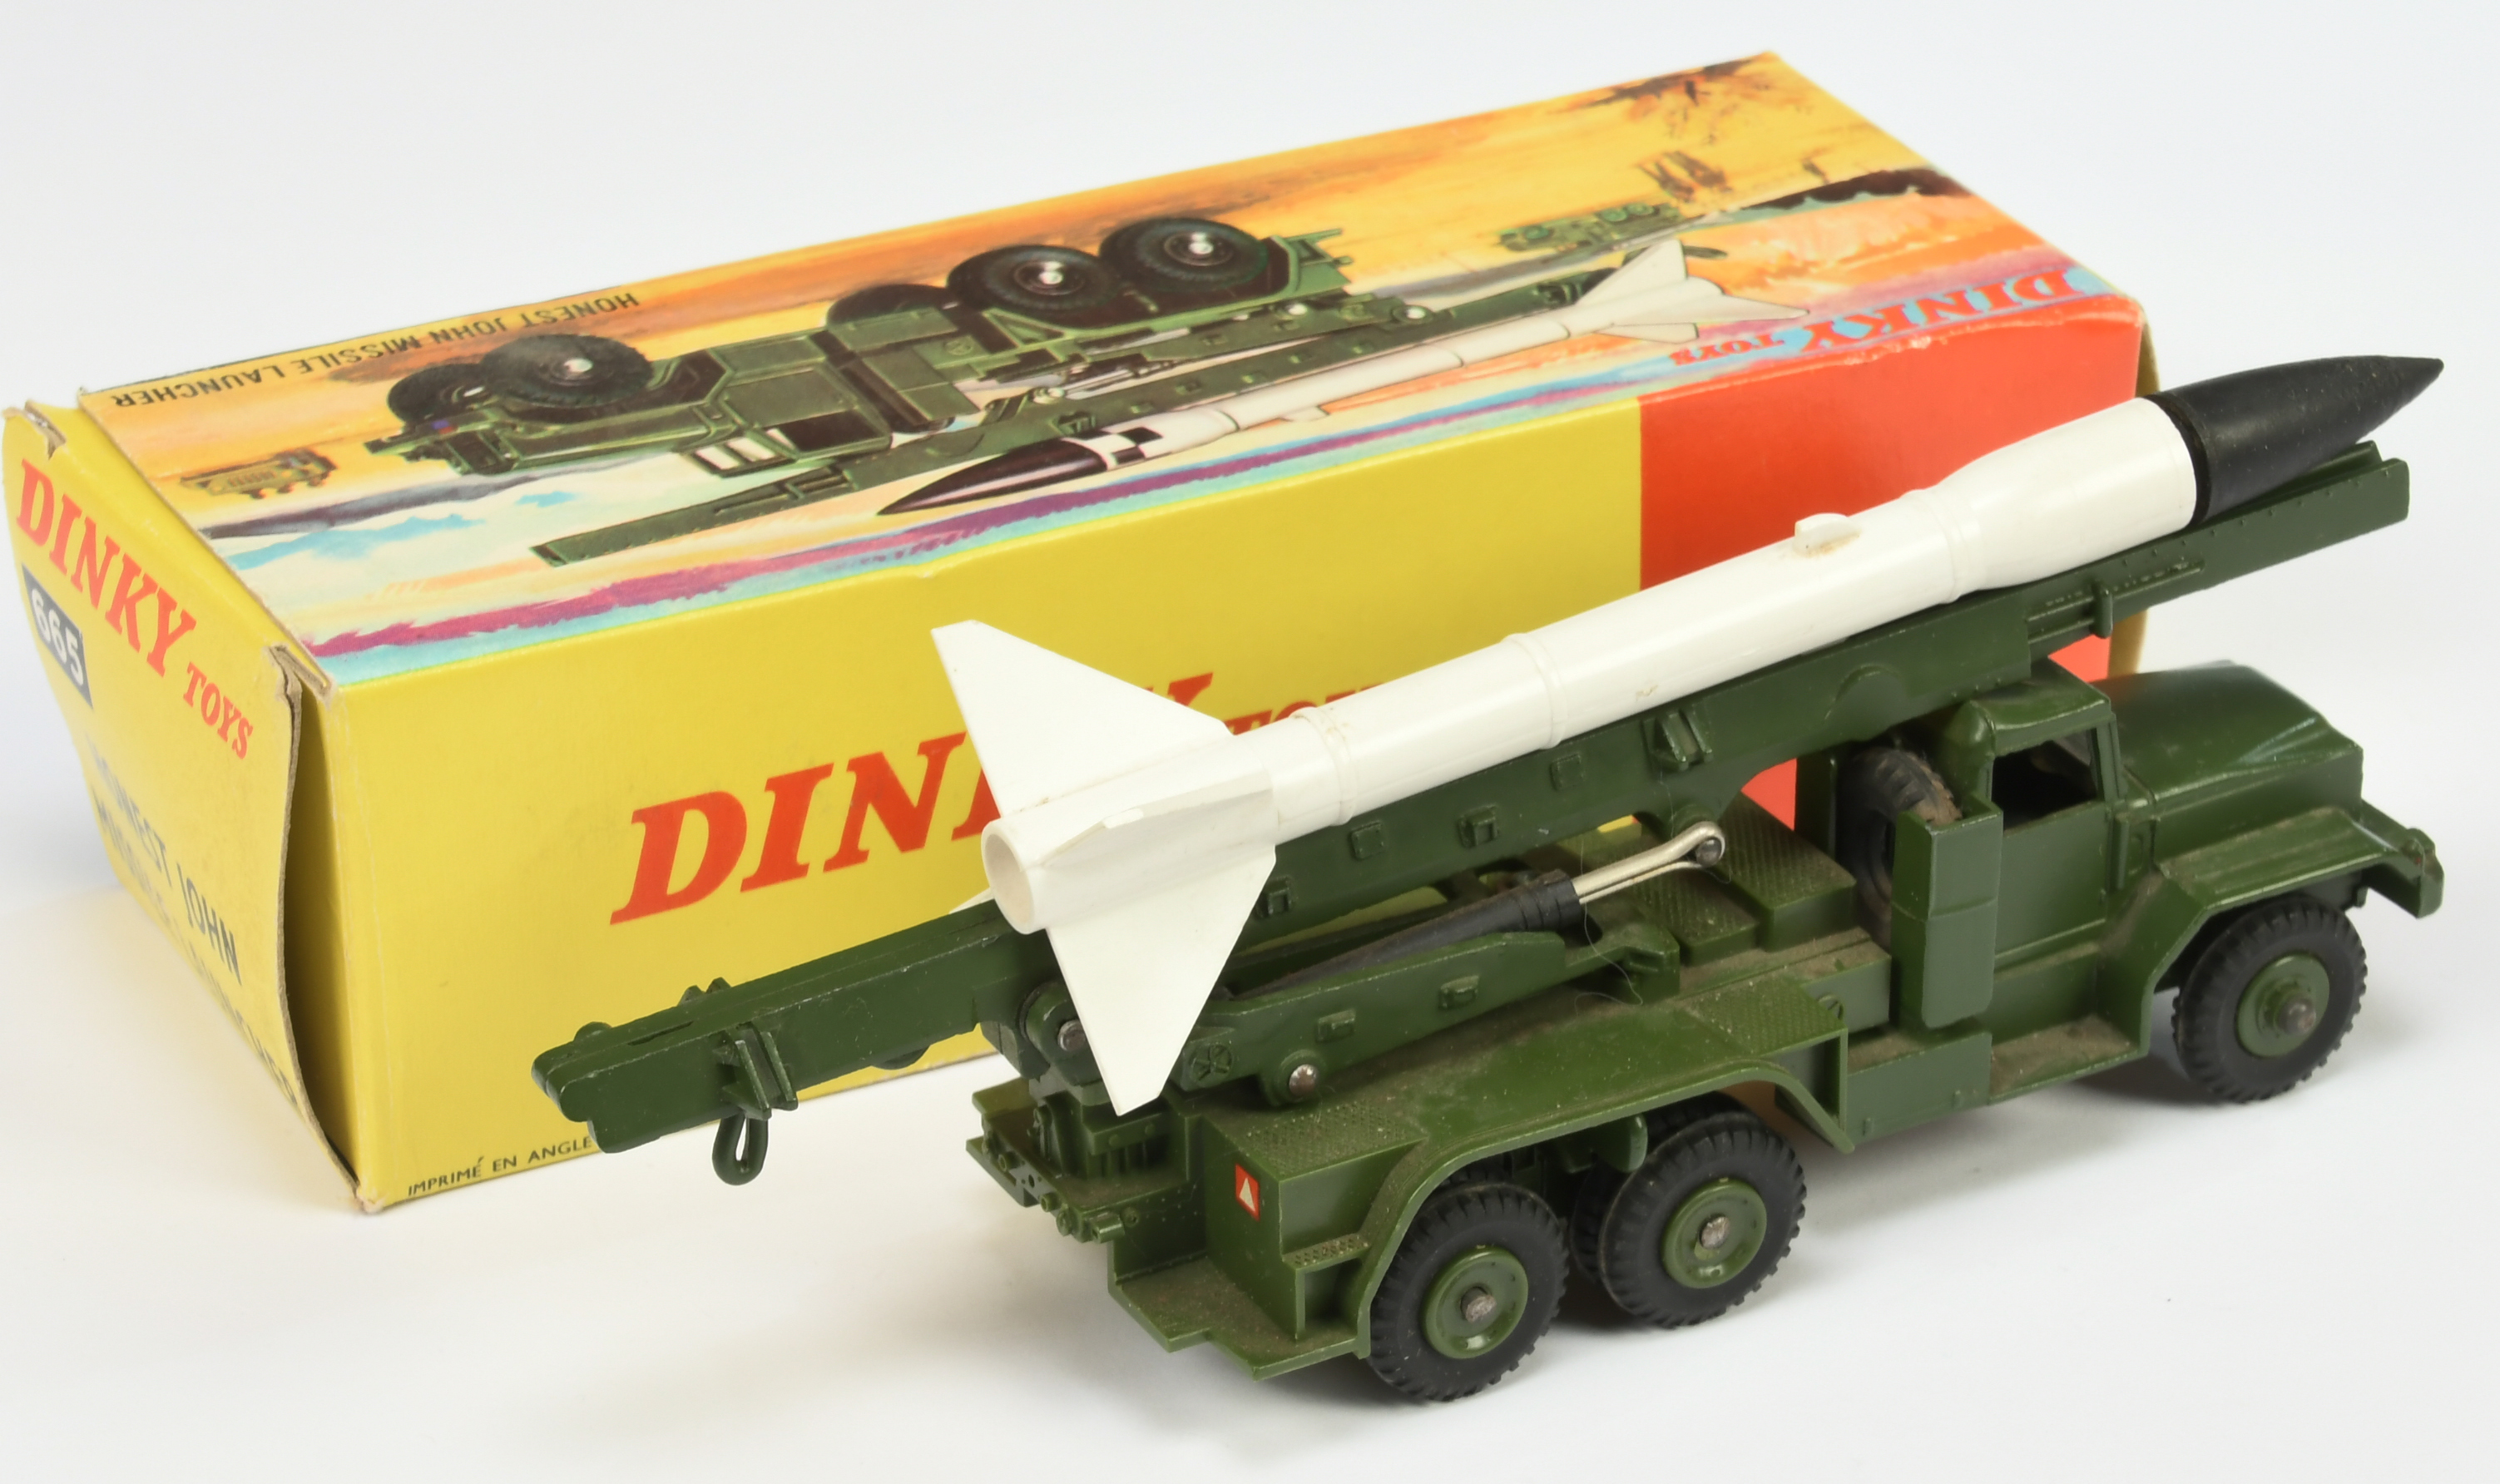 Dinky Toys Military 667 Honest John Missile Launcher - Green including plastic hubs with white an... - Image 2 of 2